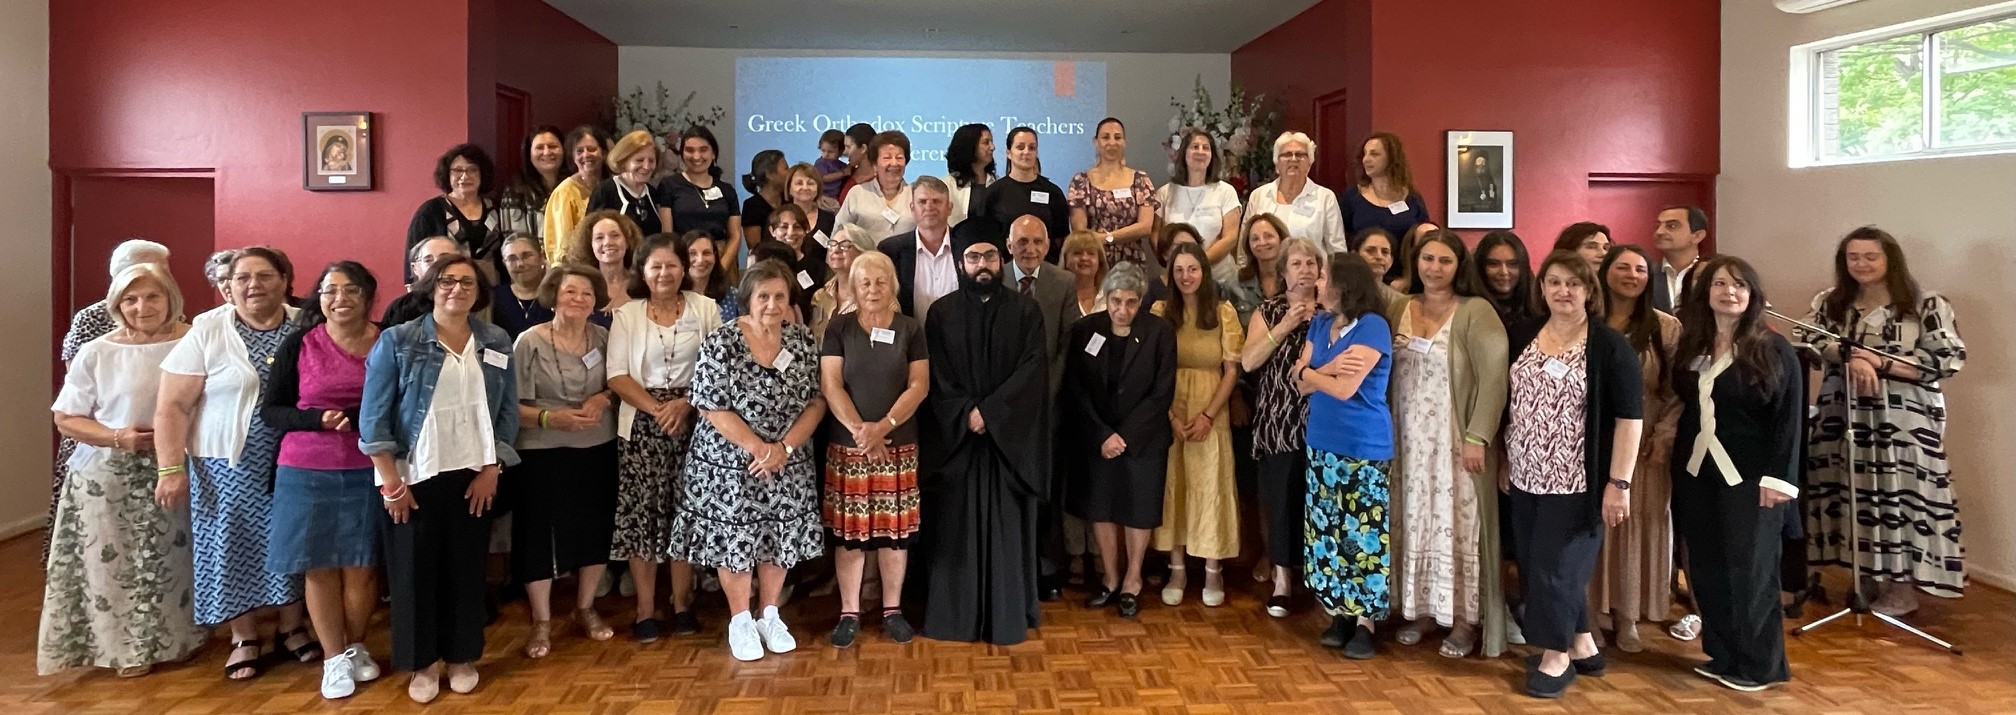 Sydney: The 2023 Annual Greek Orthodox Scripture Conference